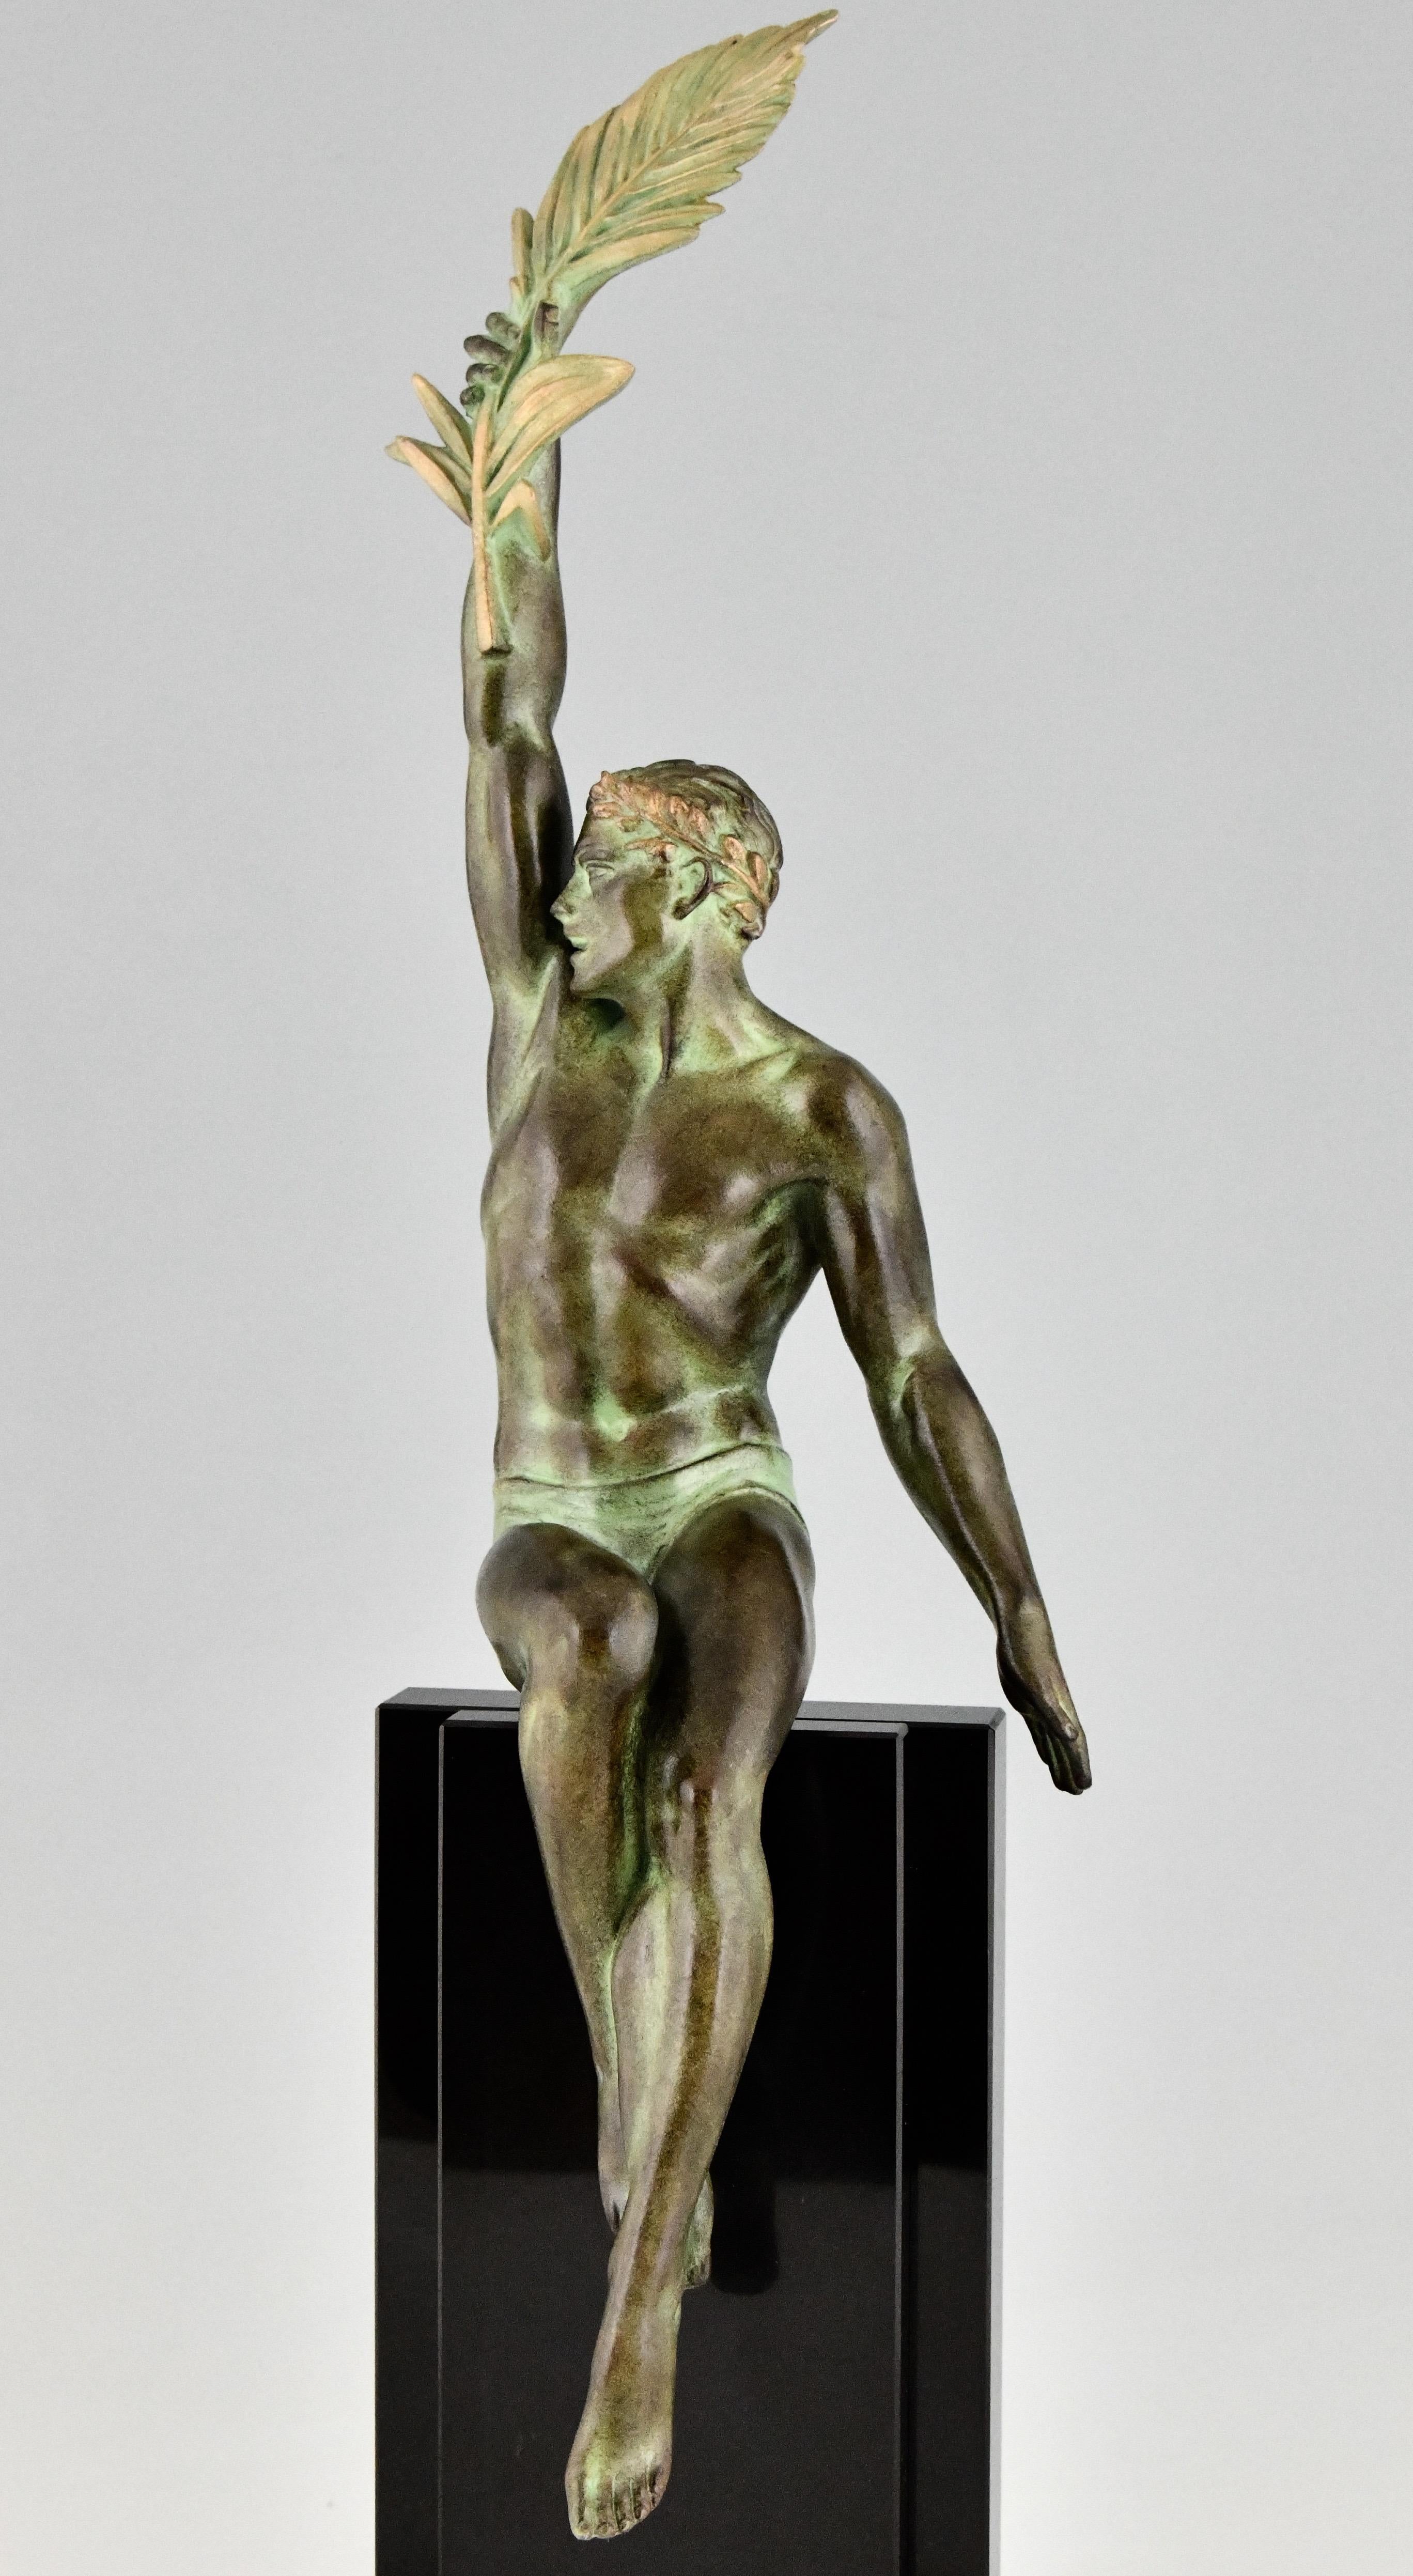 Art Deco Style Sculpture Athlete with Palm Leaf by Max Le Verrier, Victory 2